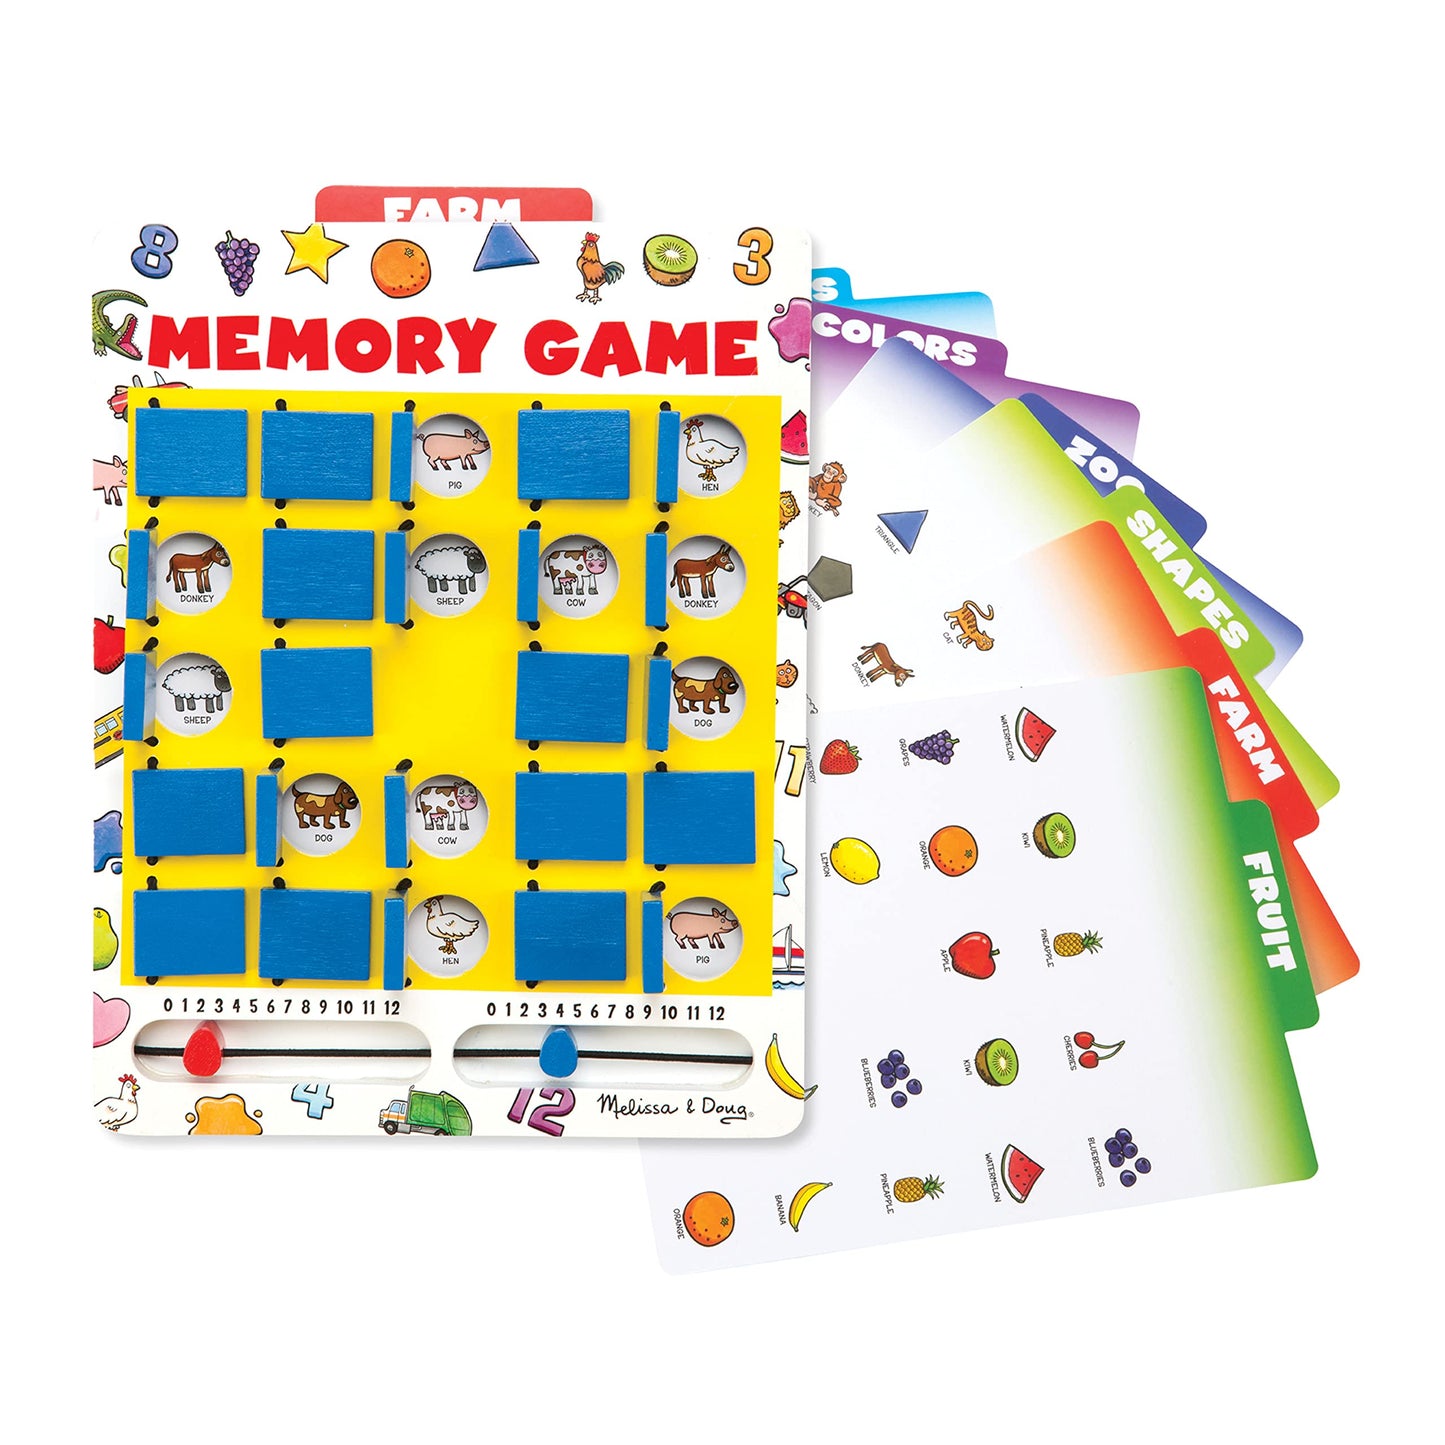 Melissa & Doug Flip to Win Travel Memory Game - Wooden Game Board, 7 Double-Sided Cards - Travel Games, Road Trip Essentials For Kids, Hangman Game For Toddlers And Kids 5+